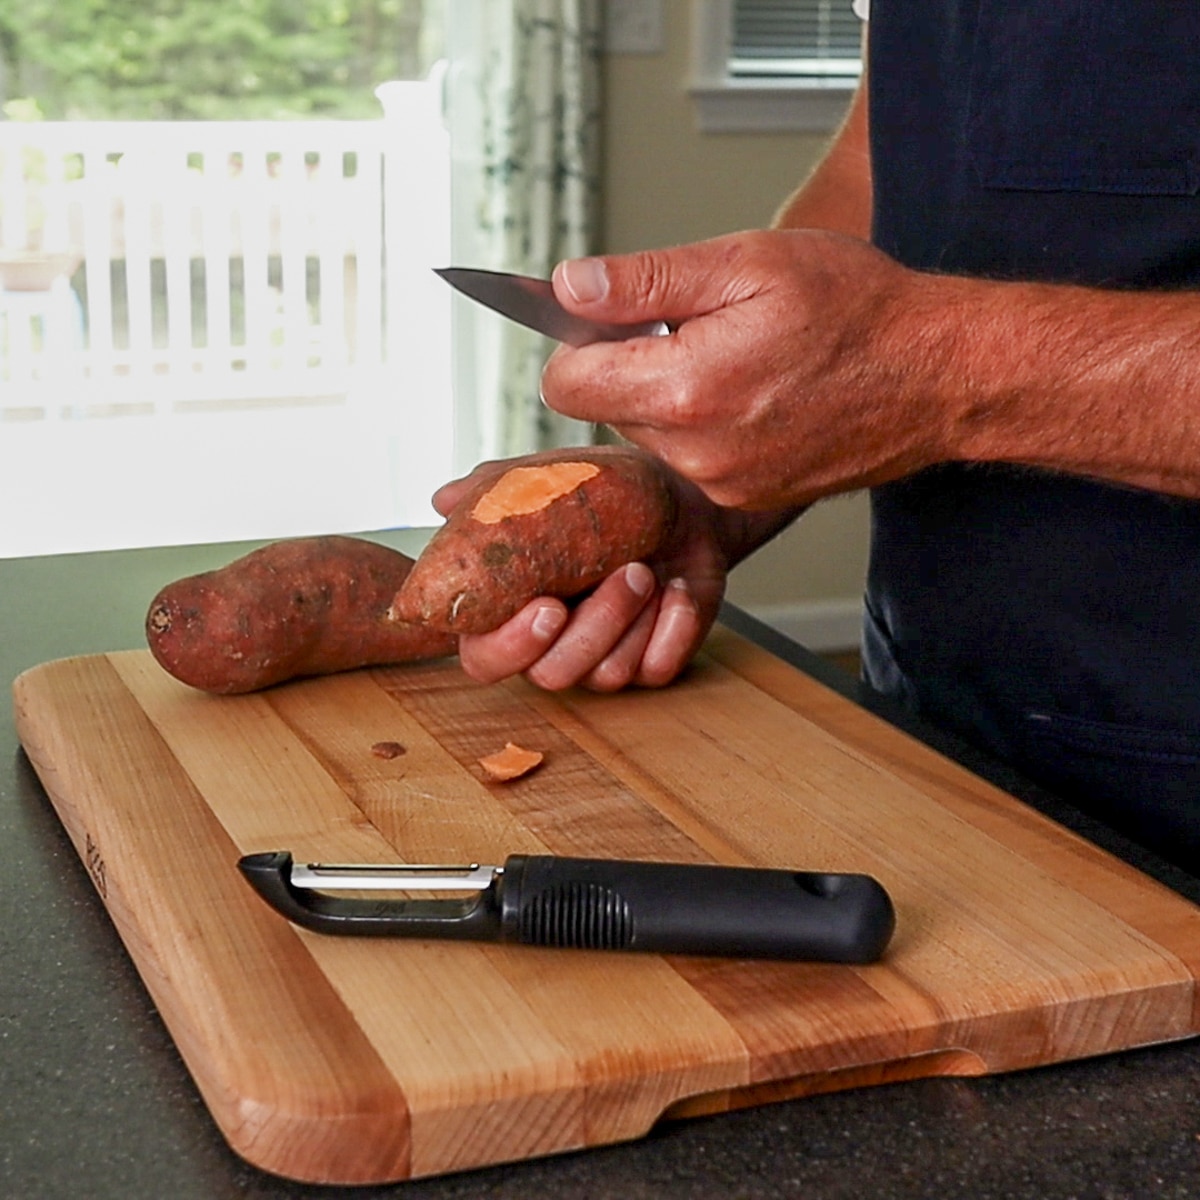 using a pairing knife and a peeler to peel a potato.